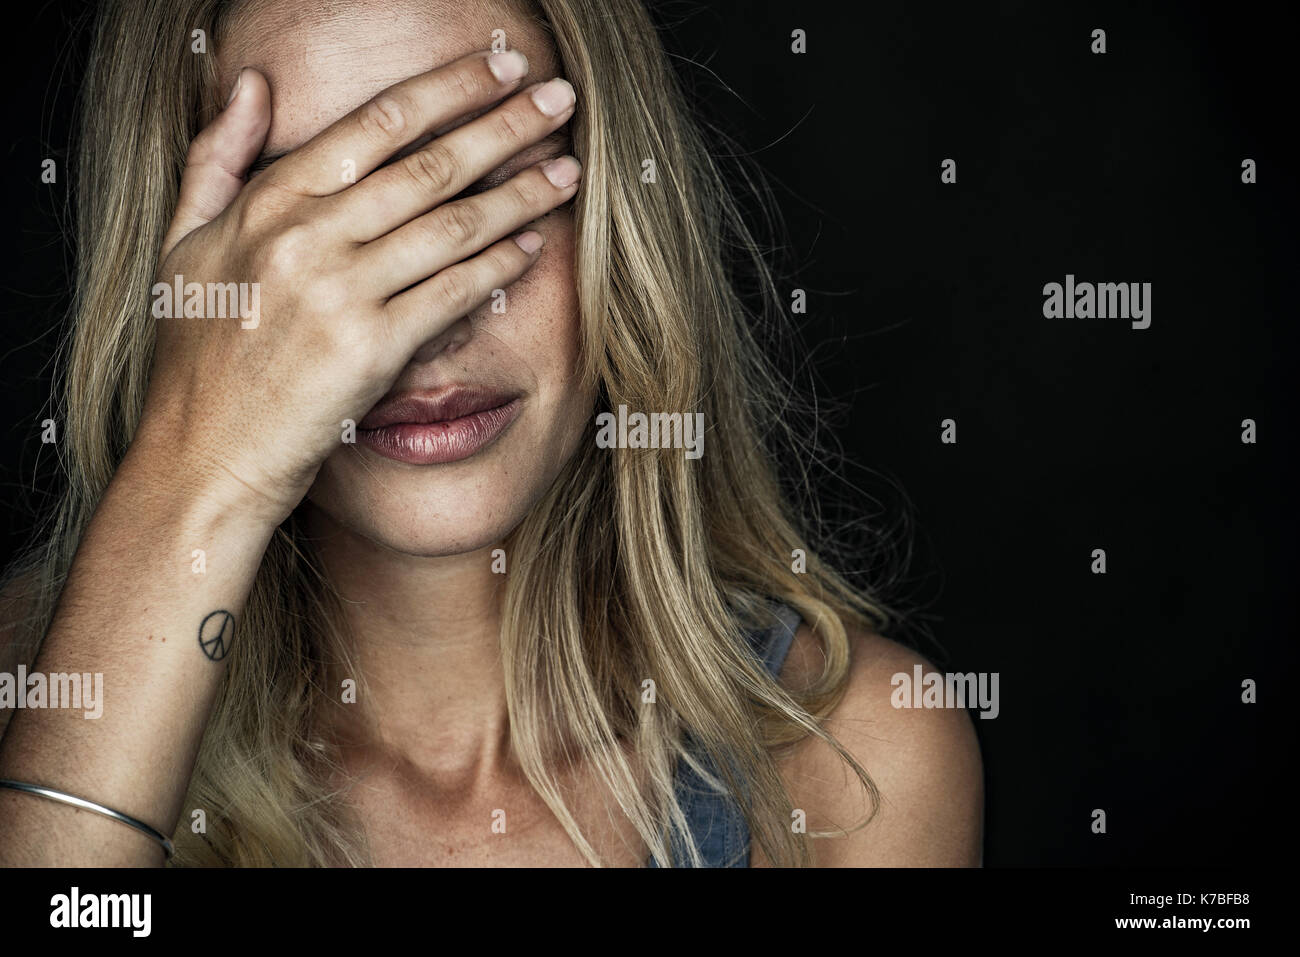 Woman covering face with hand Banque D'Images